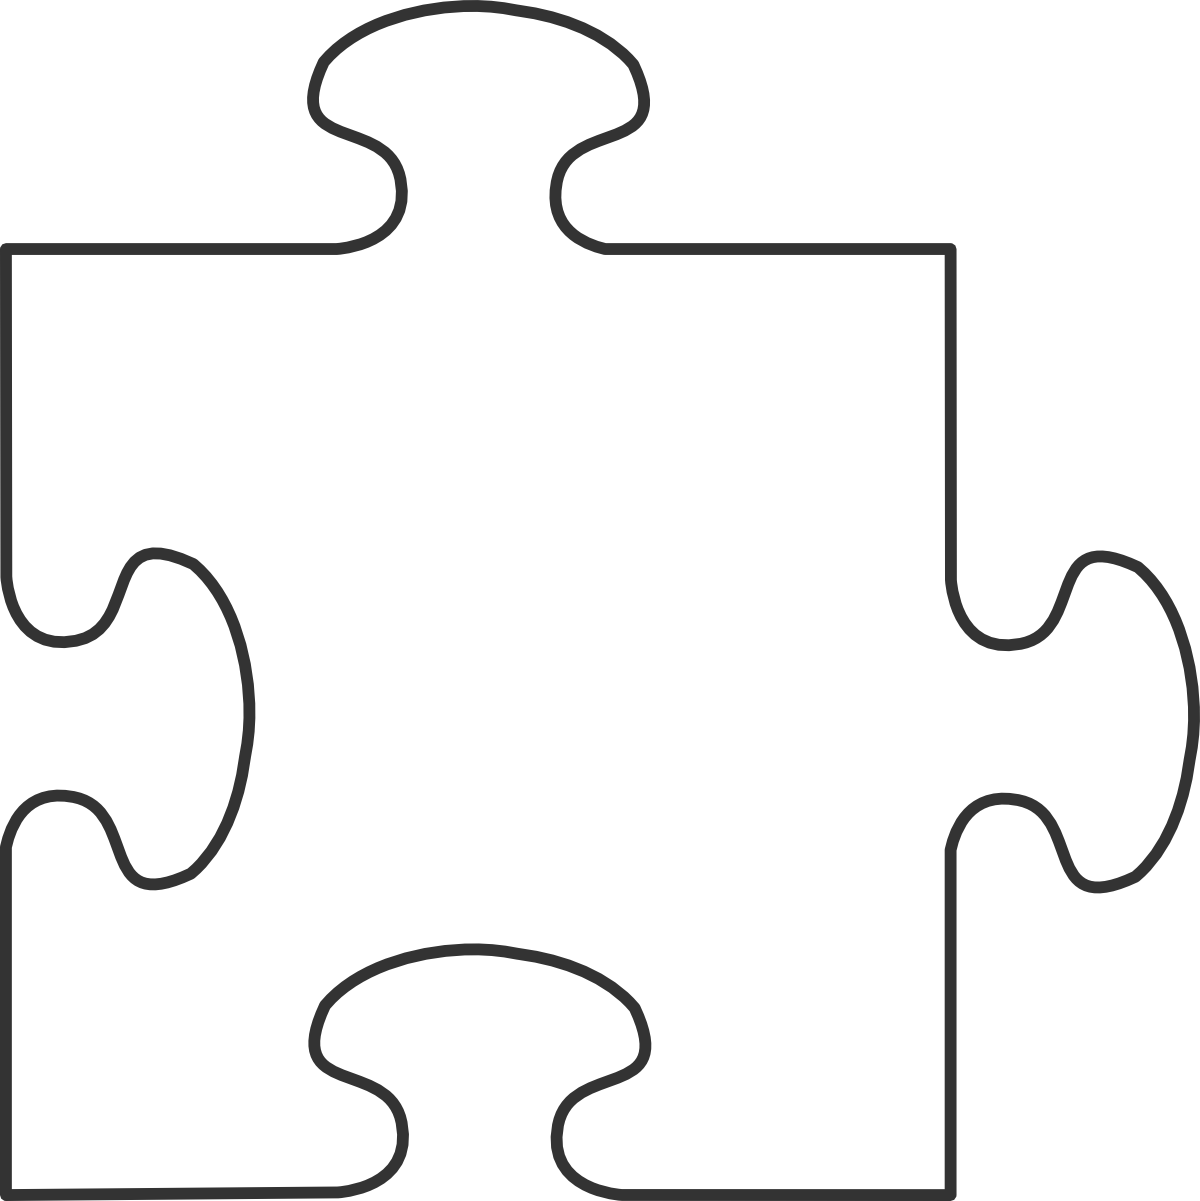 free vector puzzle clipart - photo #47